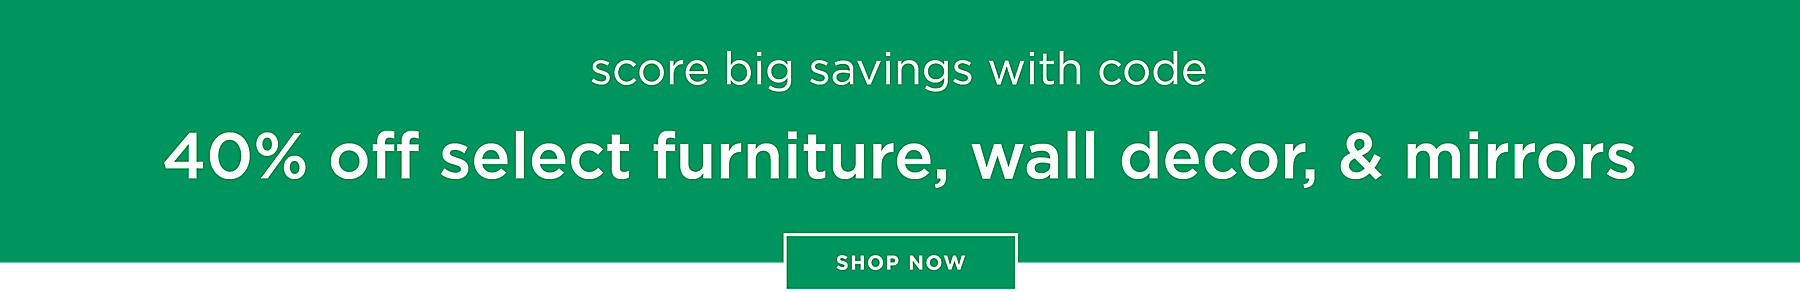 Score big savings 40% Off with code Select Furniture, Wall Decor, & Mirrors Shop Now